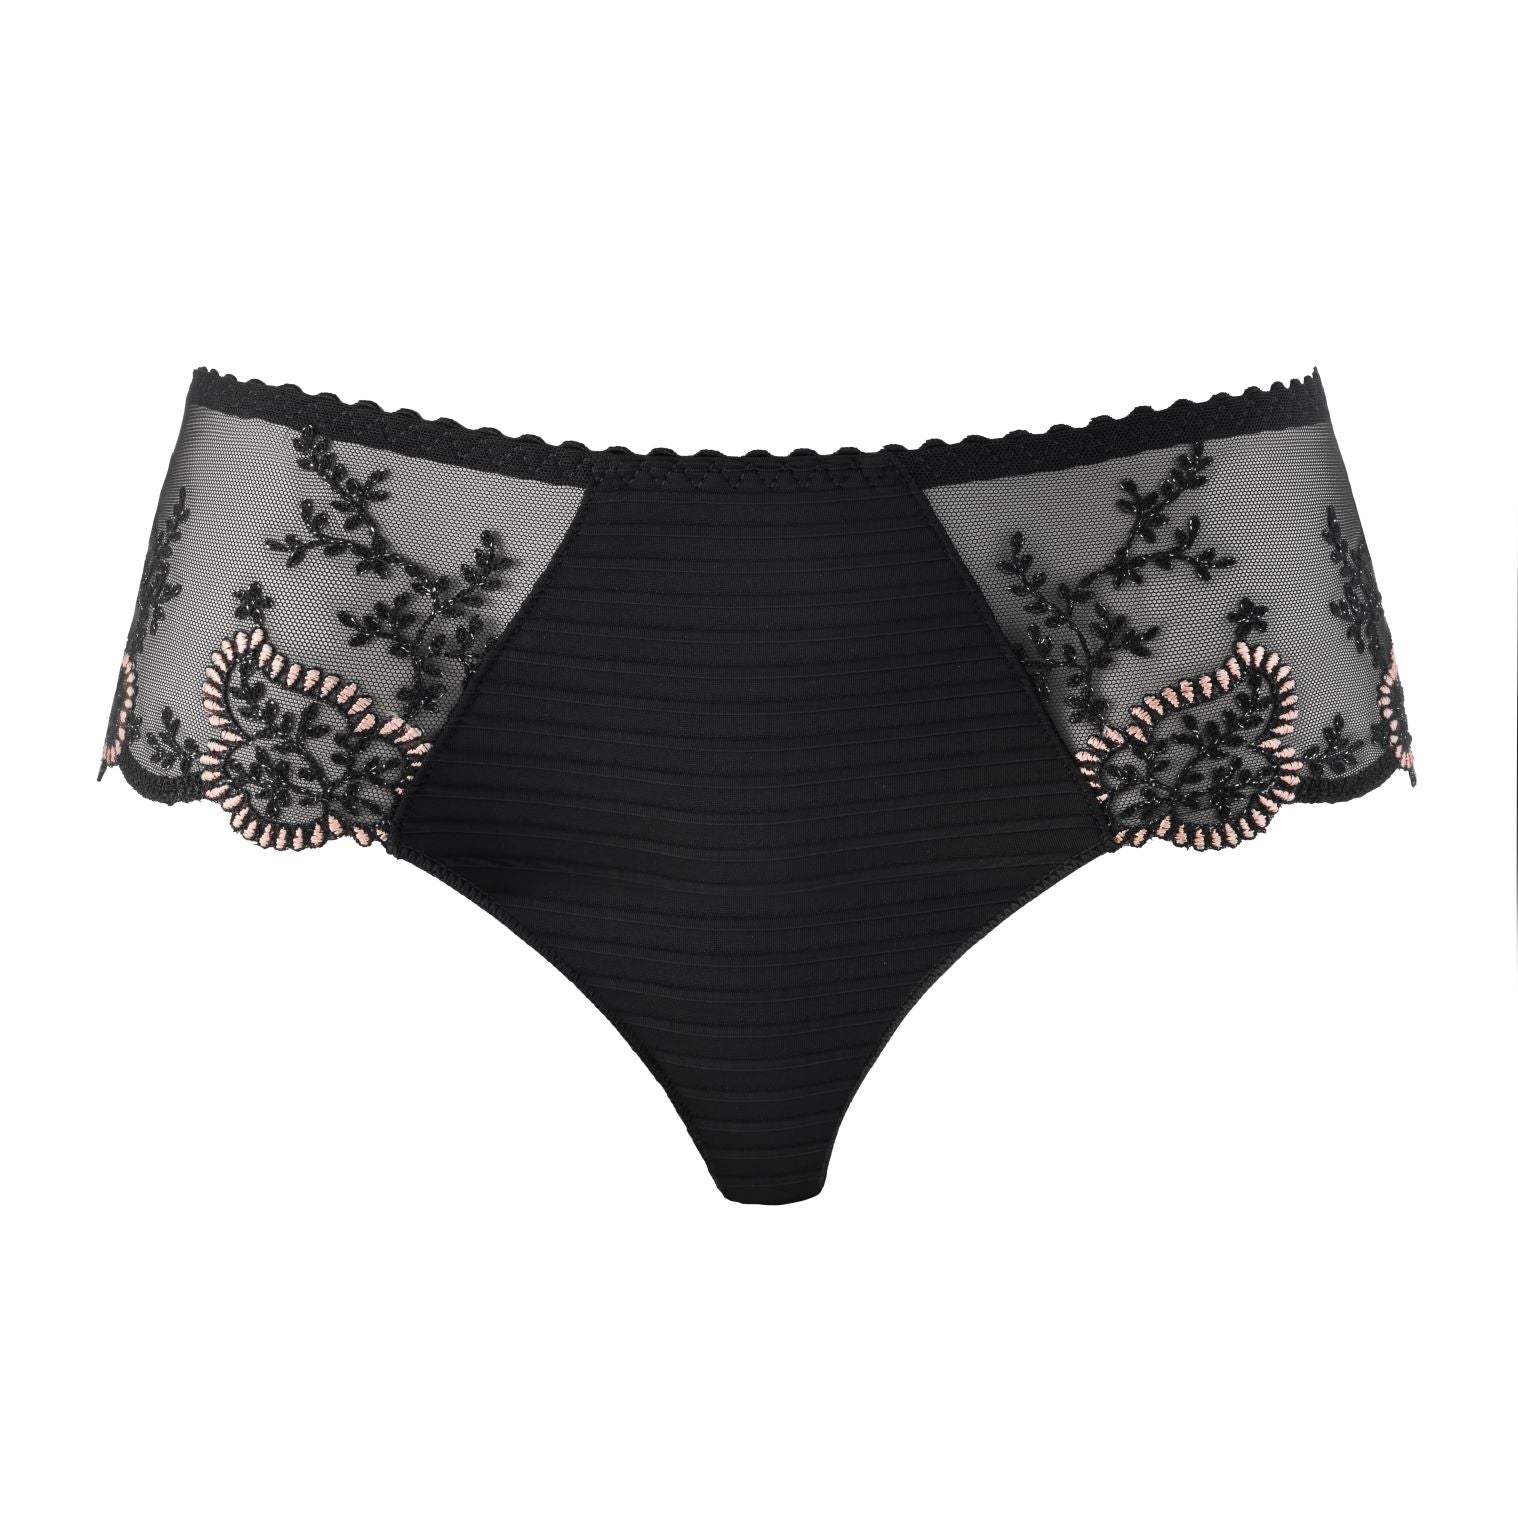 Louisa Bracq Elise Pearlescent Embroidered Leaves Shorty | Di Moda Lingerie